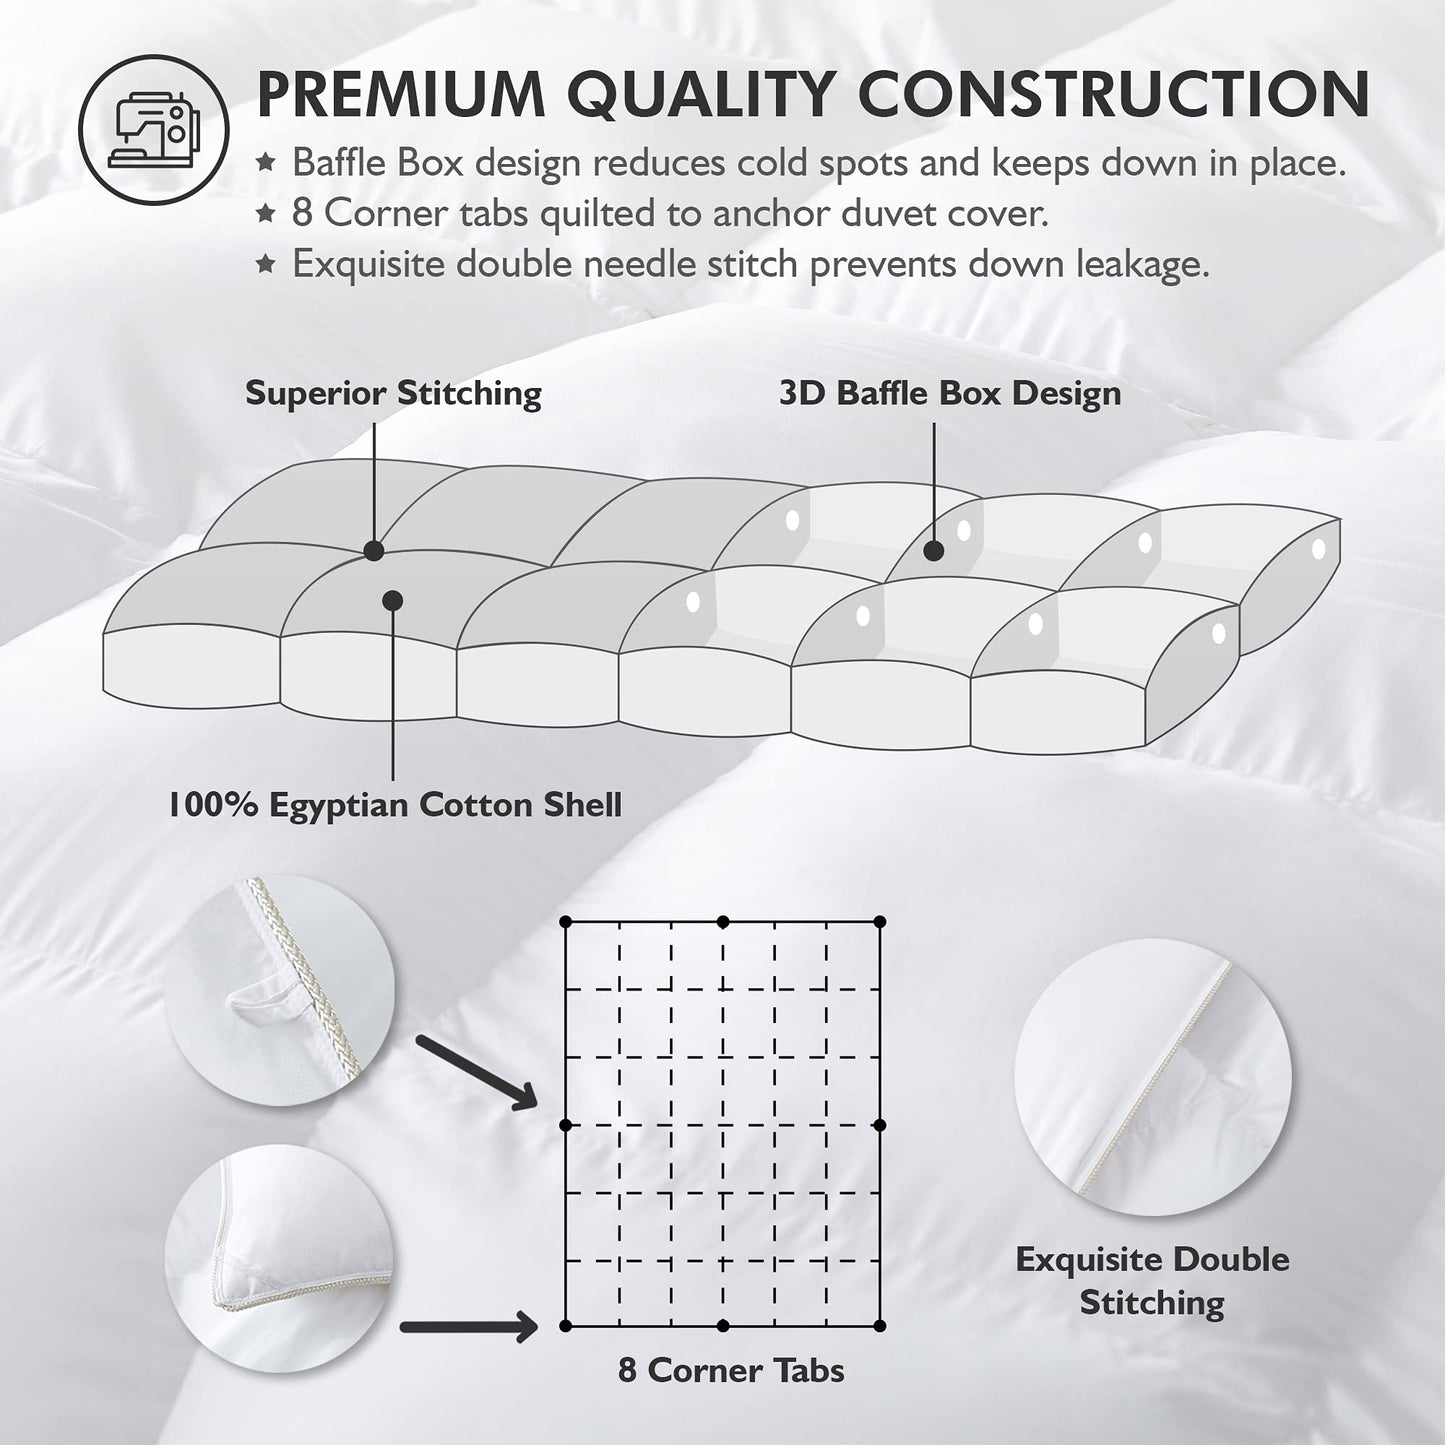 Luxurious Oversize California King 108" x 98" Size Goose Down Fiber Waterfowl Feather Fiber Comforter Duvet, 100% Egyptian Cotton Cover, 68 oz. Fill Weight, Baffle Box Design, White Solid